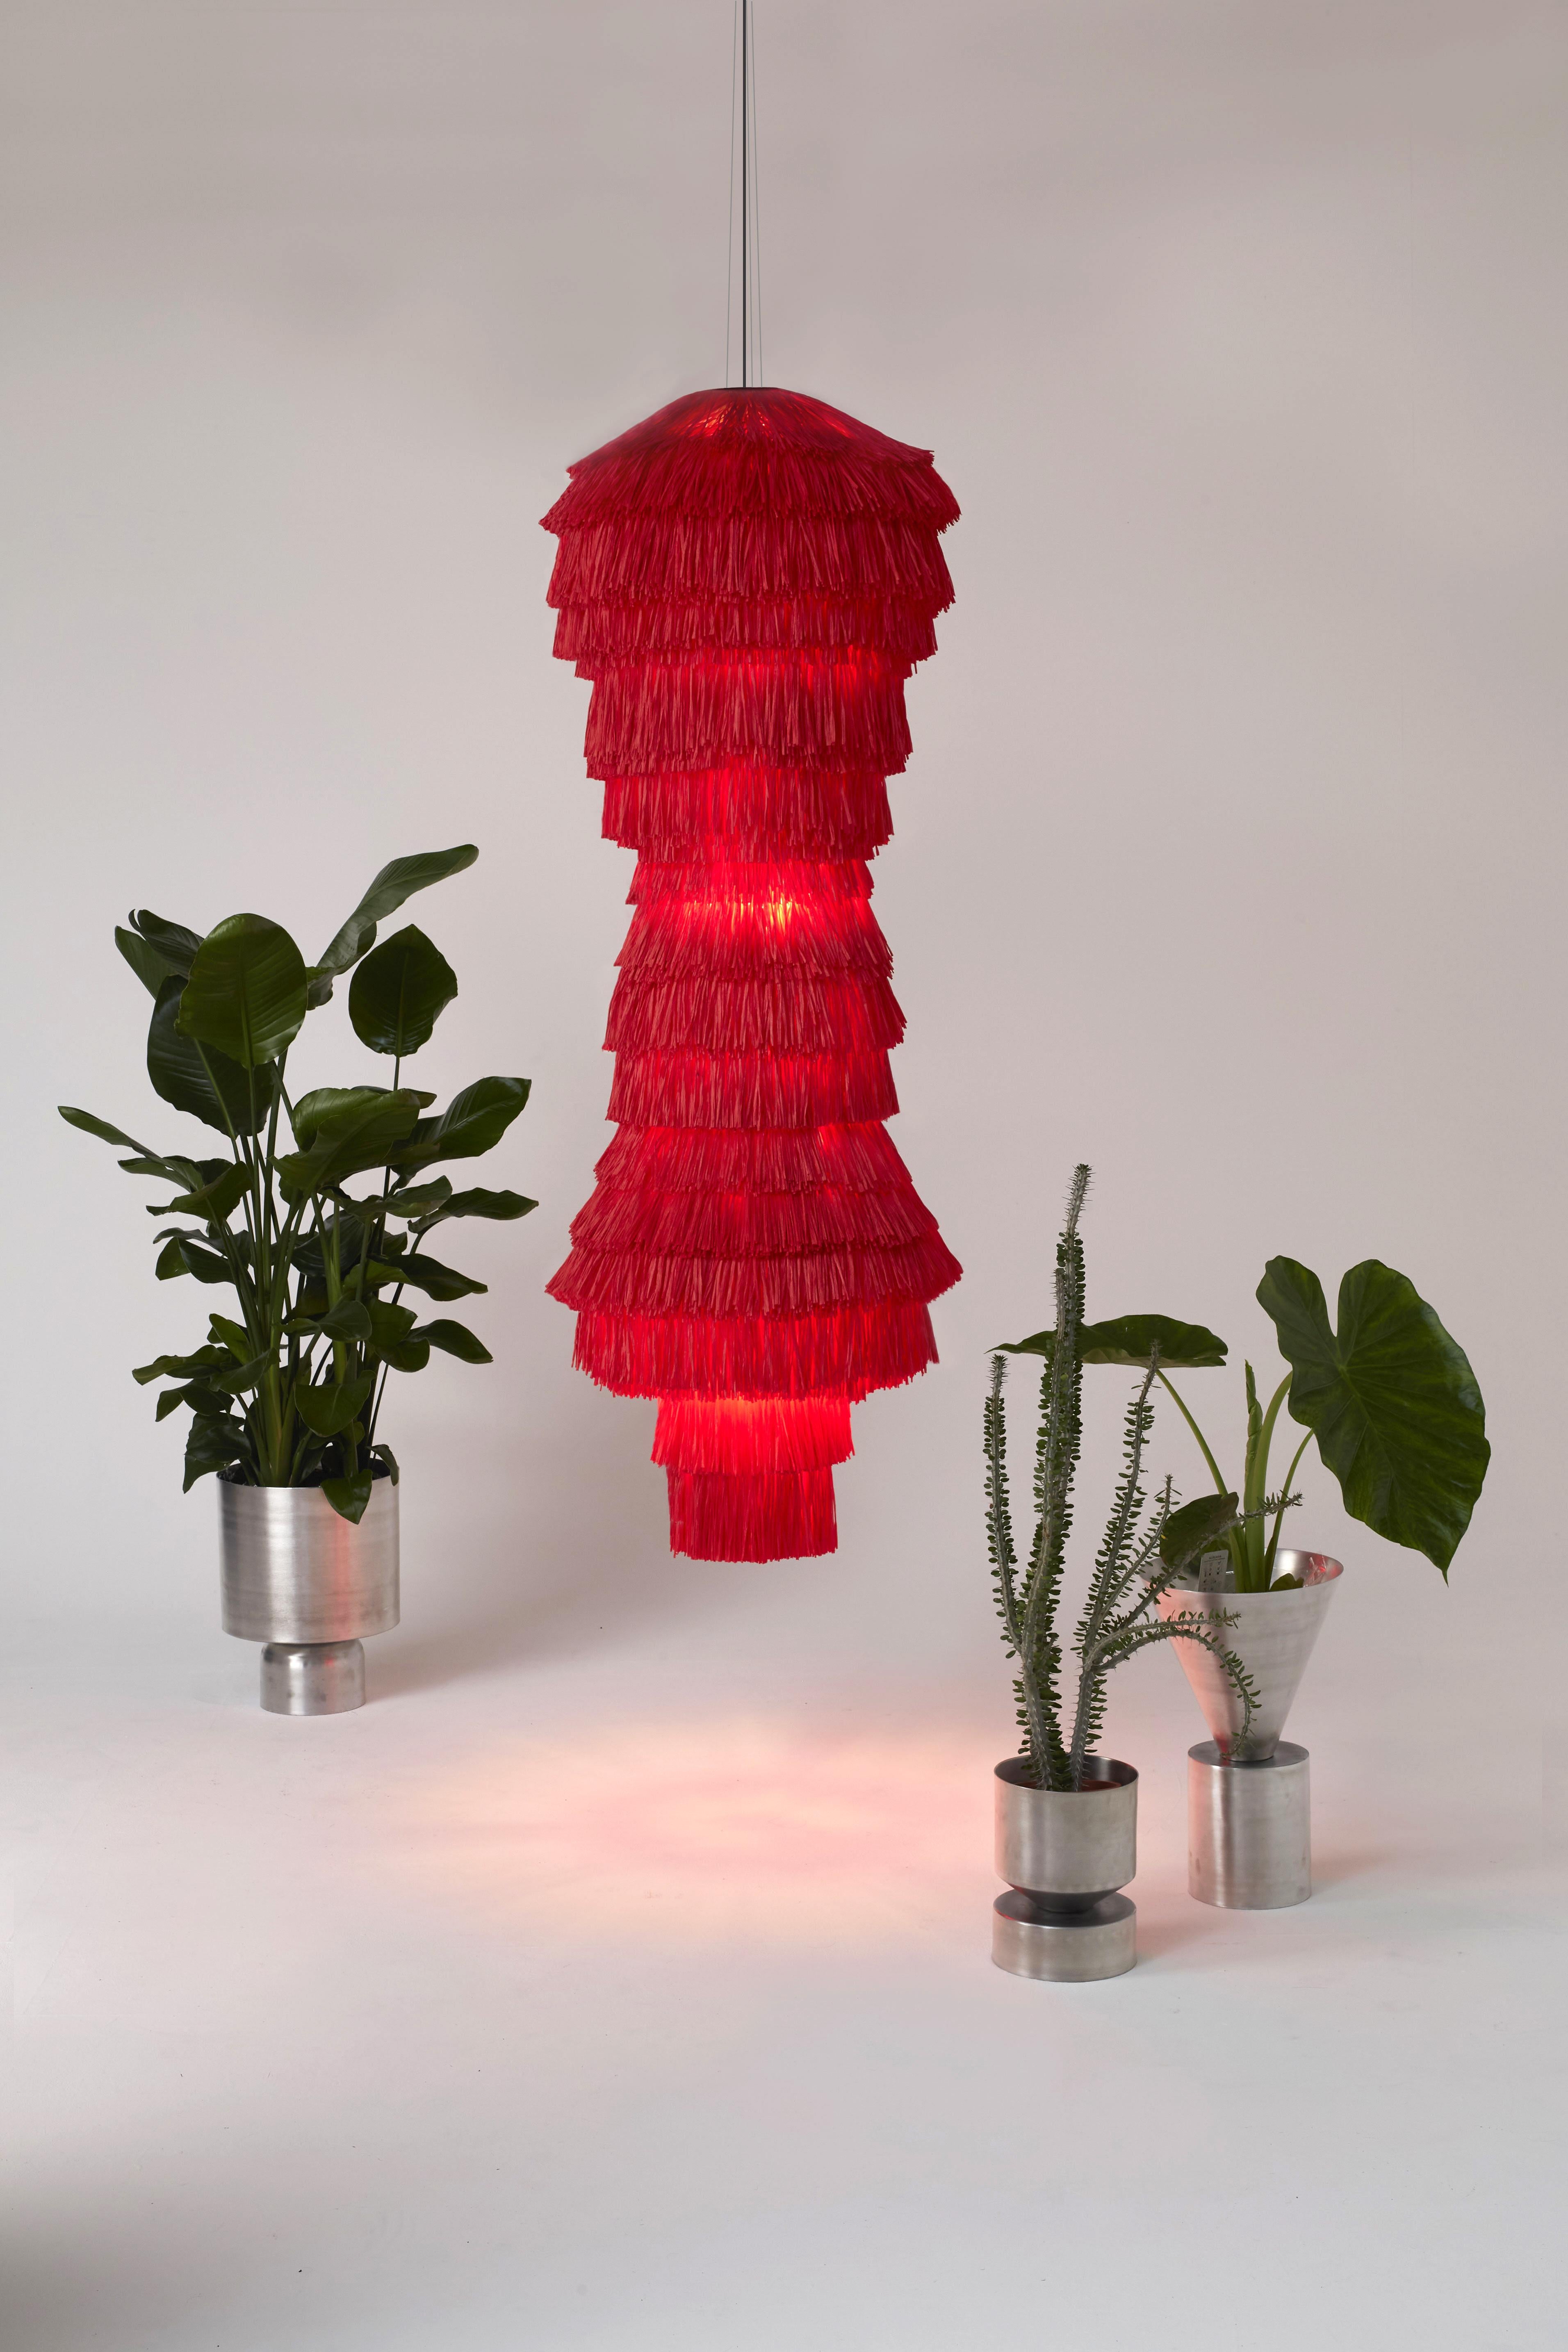 Fran tower lamp by Llot Llov
Handcrafted light object
Dimensions: Ø 62 cm x H: 190 cm
Materials: raffia fringes

The latest addition to the FRAN family is the FRAN TOWER. The eye-catching and elaborately handcrafted light object consists of 15